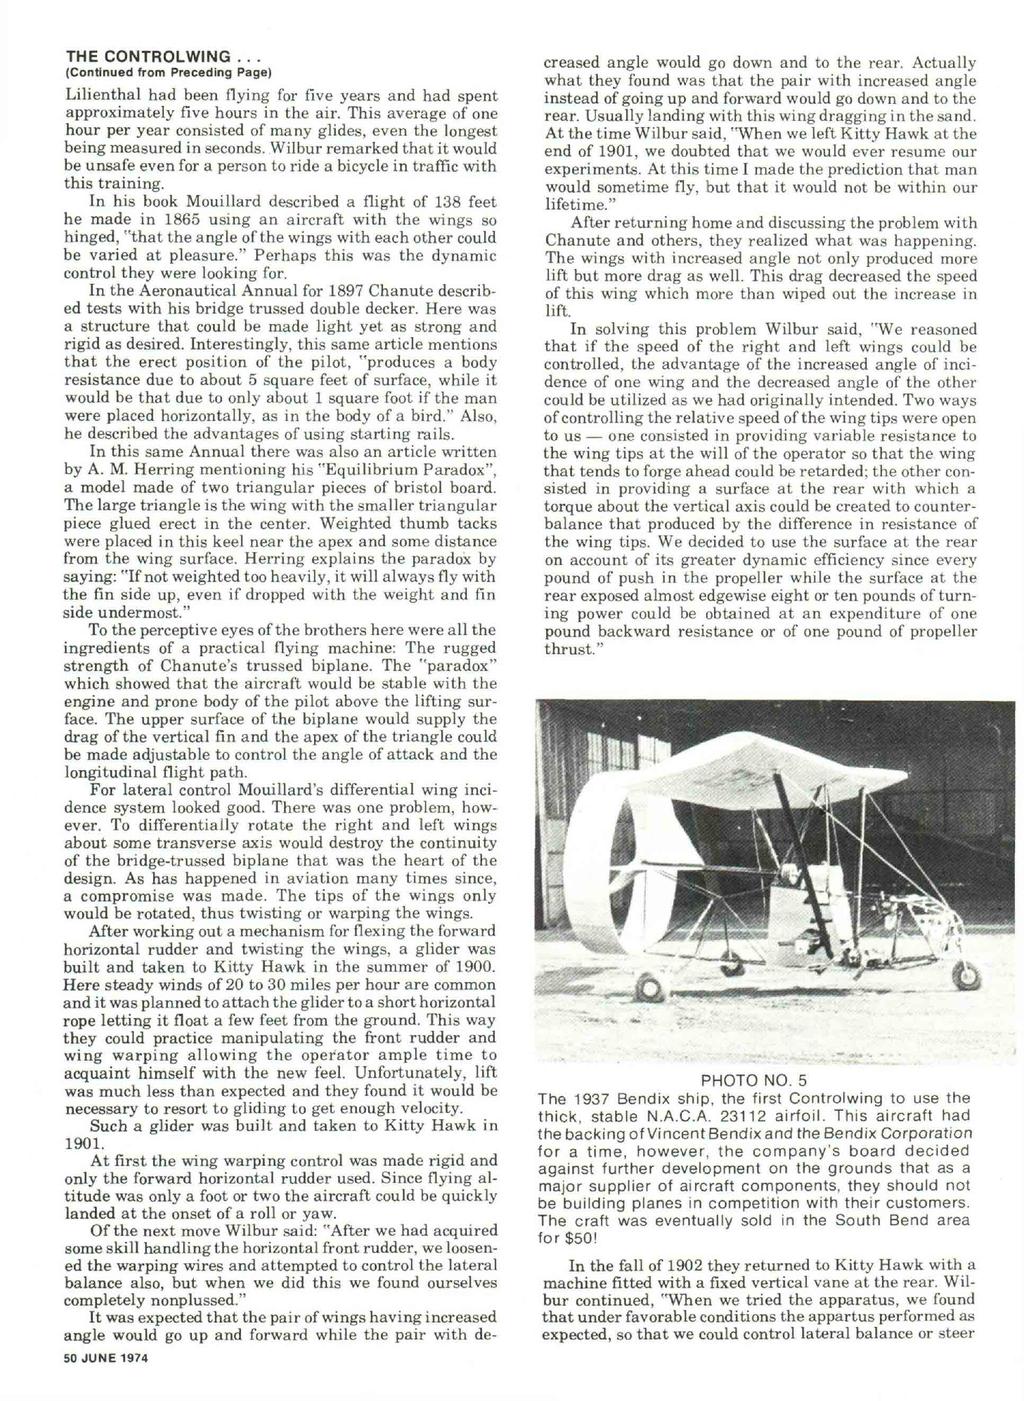 THE CONTROLWING... (Continued from Preceding Page) Lilienthal had been flying for five years and had spent approximately five hours in the air.